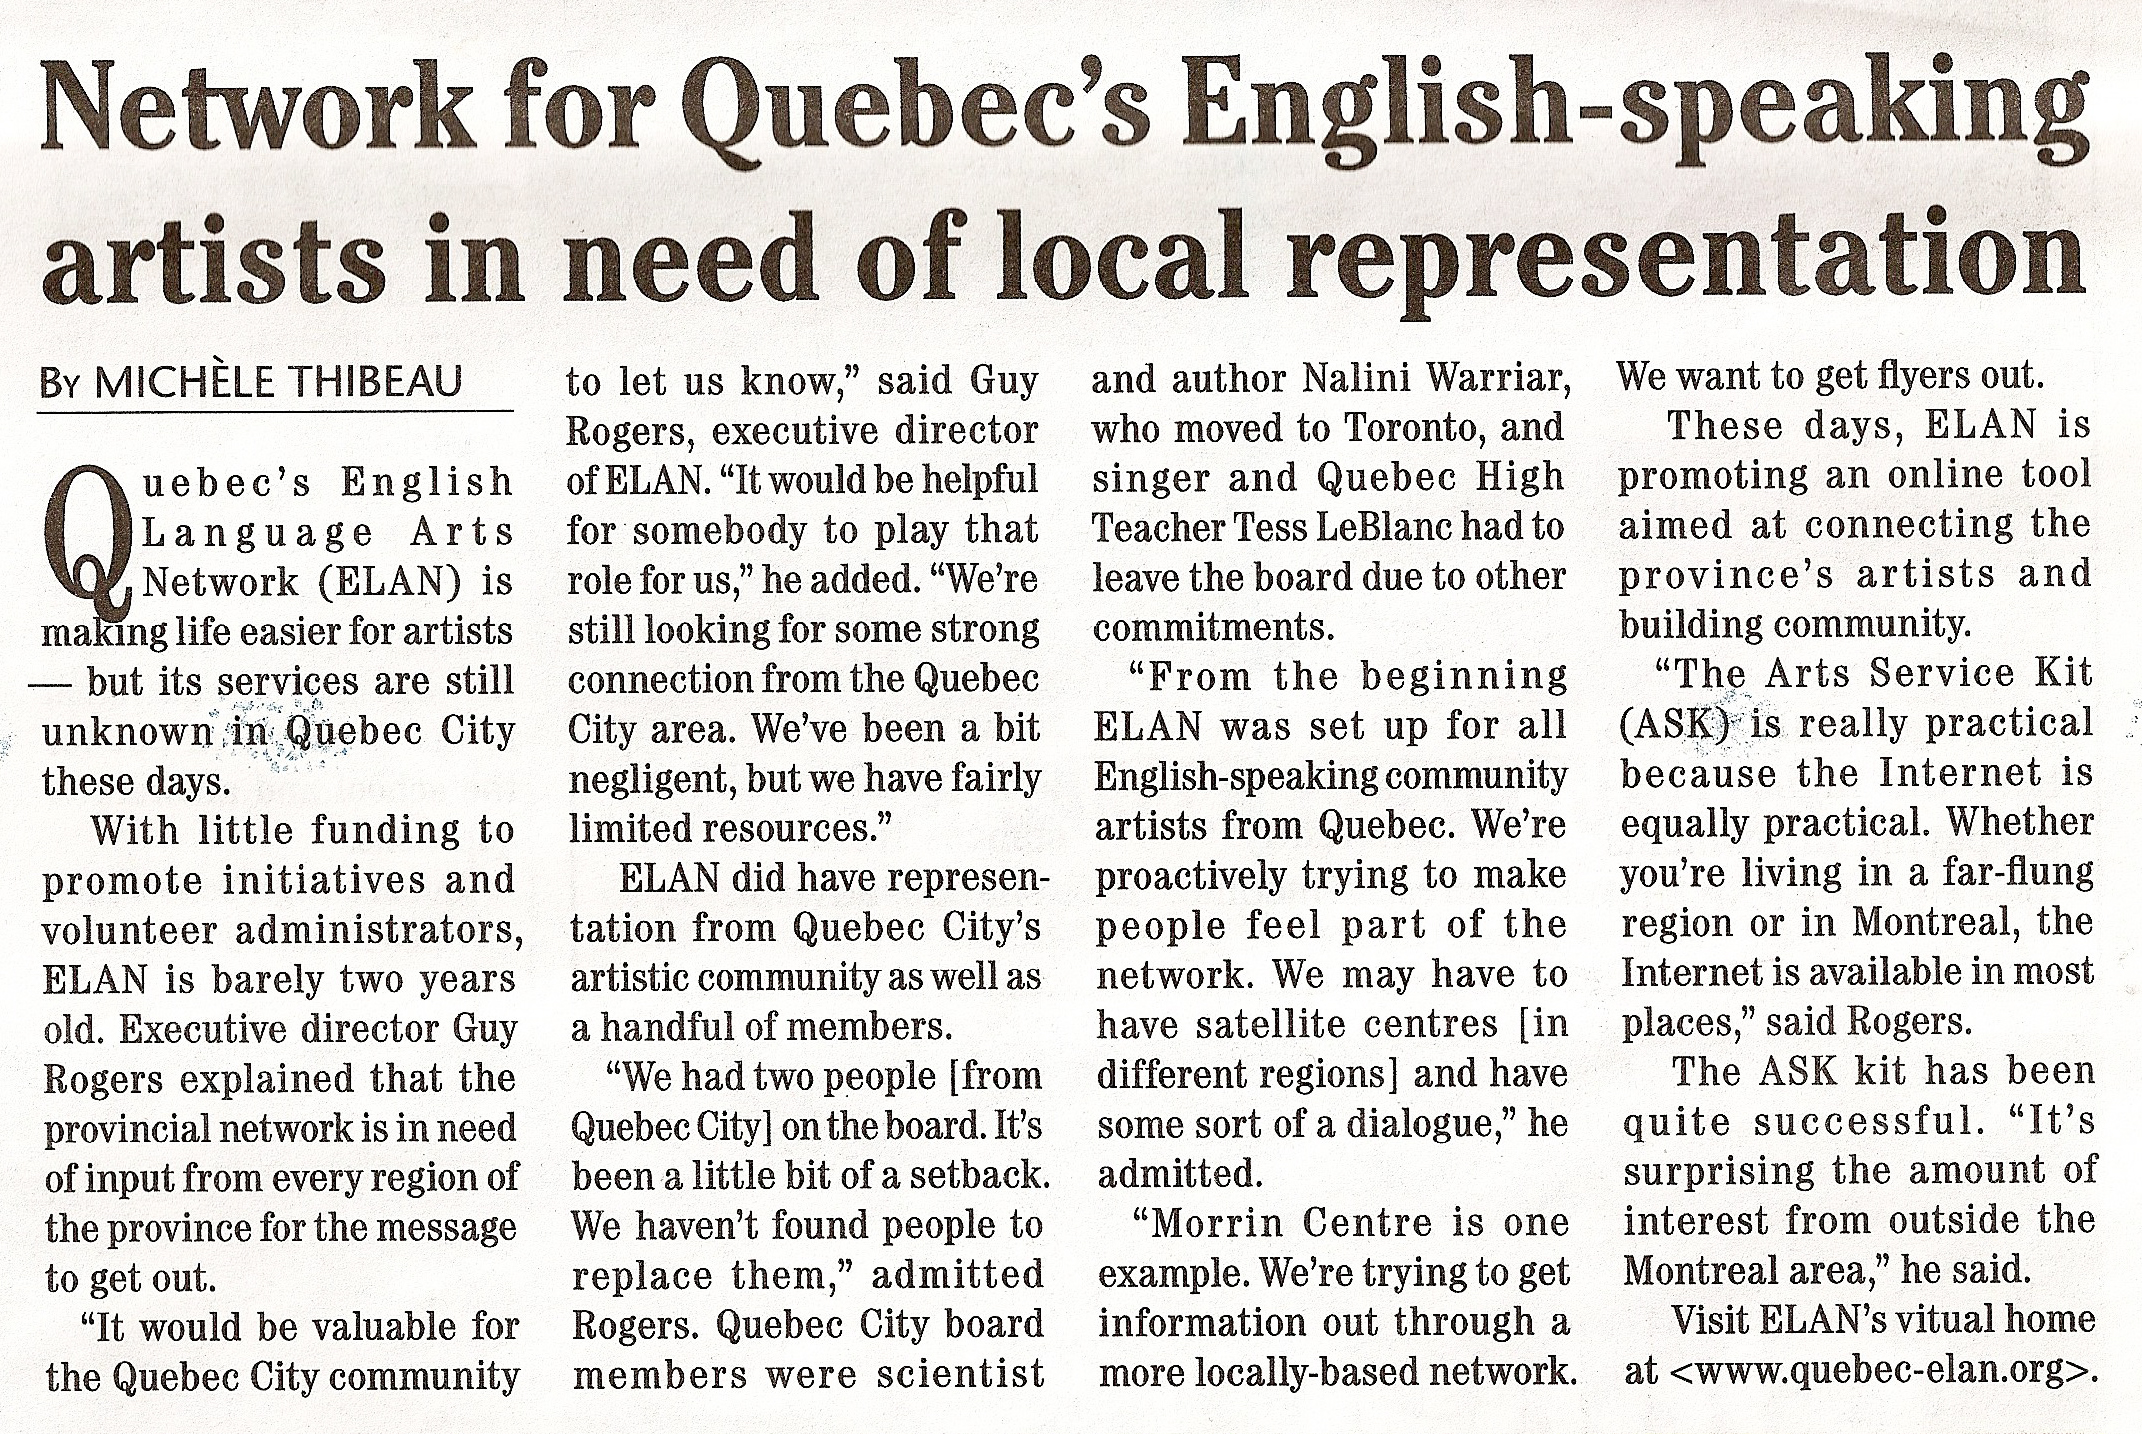 Network for Quebec's English Speaking Artists in Need of Local Representation- Quebec Chronicle (No date)